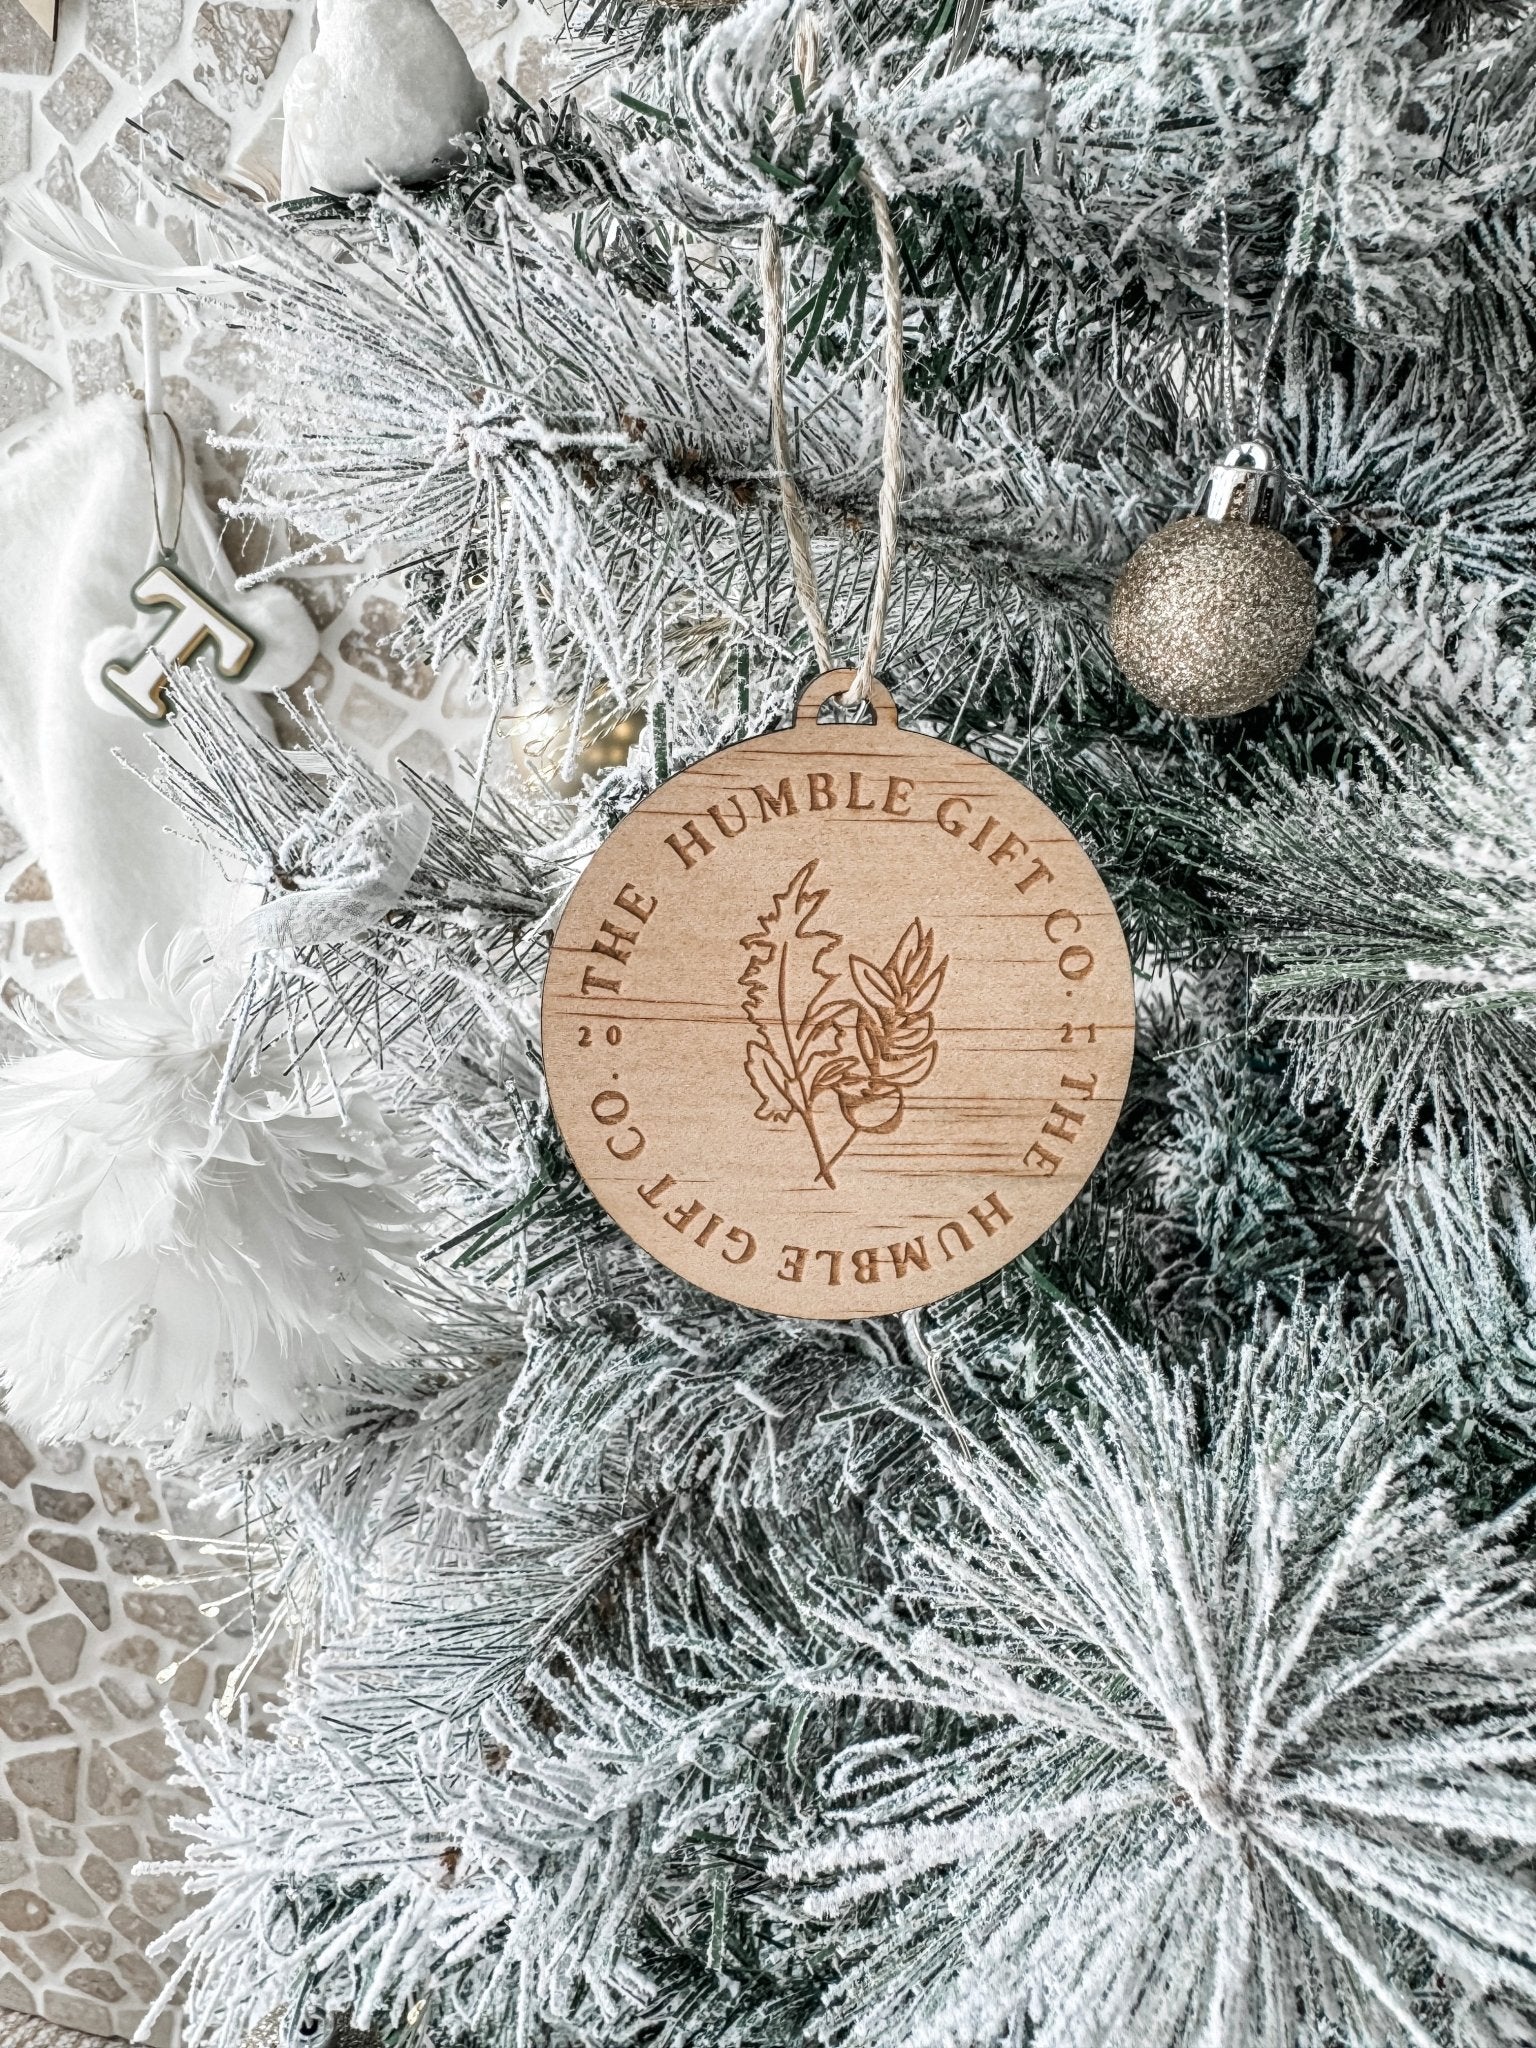 Business Logo Tree Ornament - The Humble Gift Co.